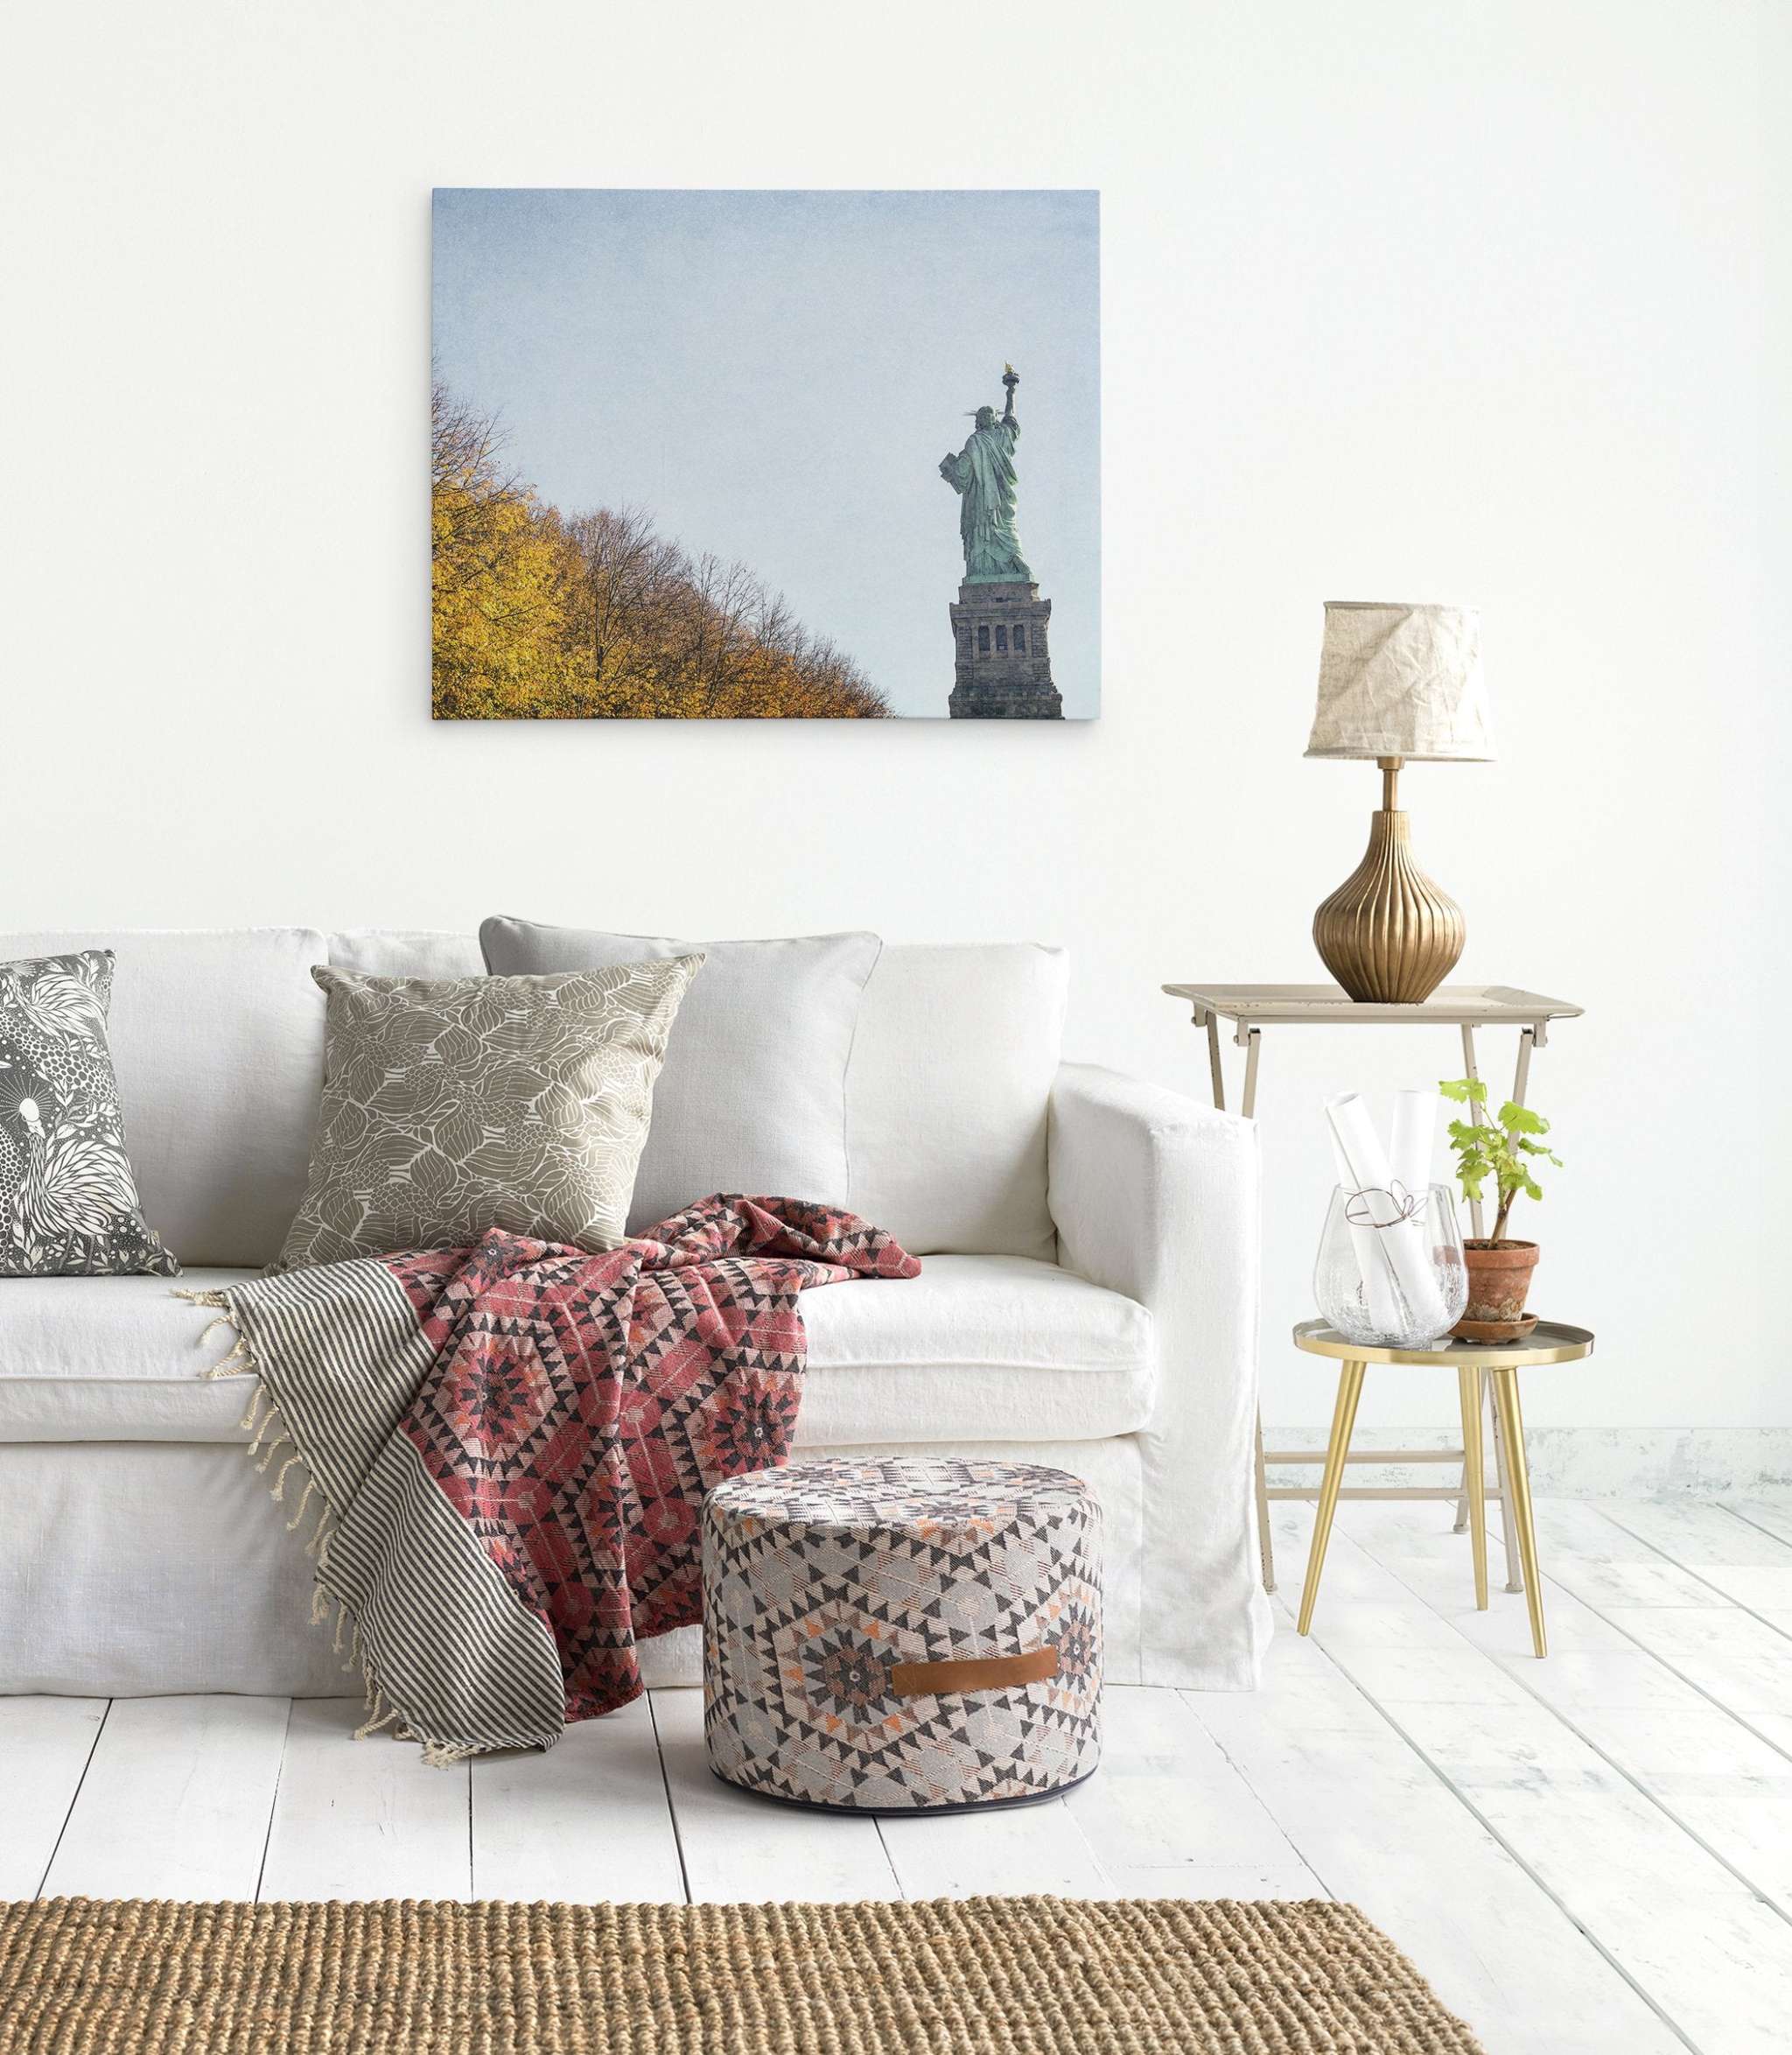 A bright living room features a white couch with patterned cushions and a colorful throw blanket, an ottoman, a side table with a lamp, and a small plant. A wall-mounted picture of the Statue of Liberty on premium artist-grade canvas is visible above the couch. The New York City Canvas Wall Art, &#39;Liberty in Fall&#39; by Offley Green adds a stylish touch to the décor. Light wood flooring completes the setting.